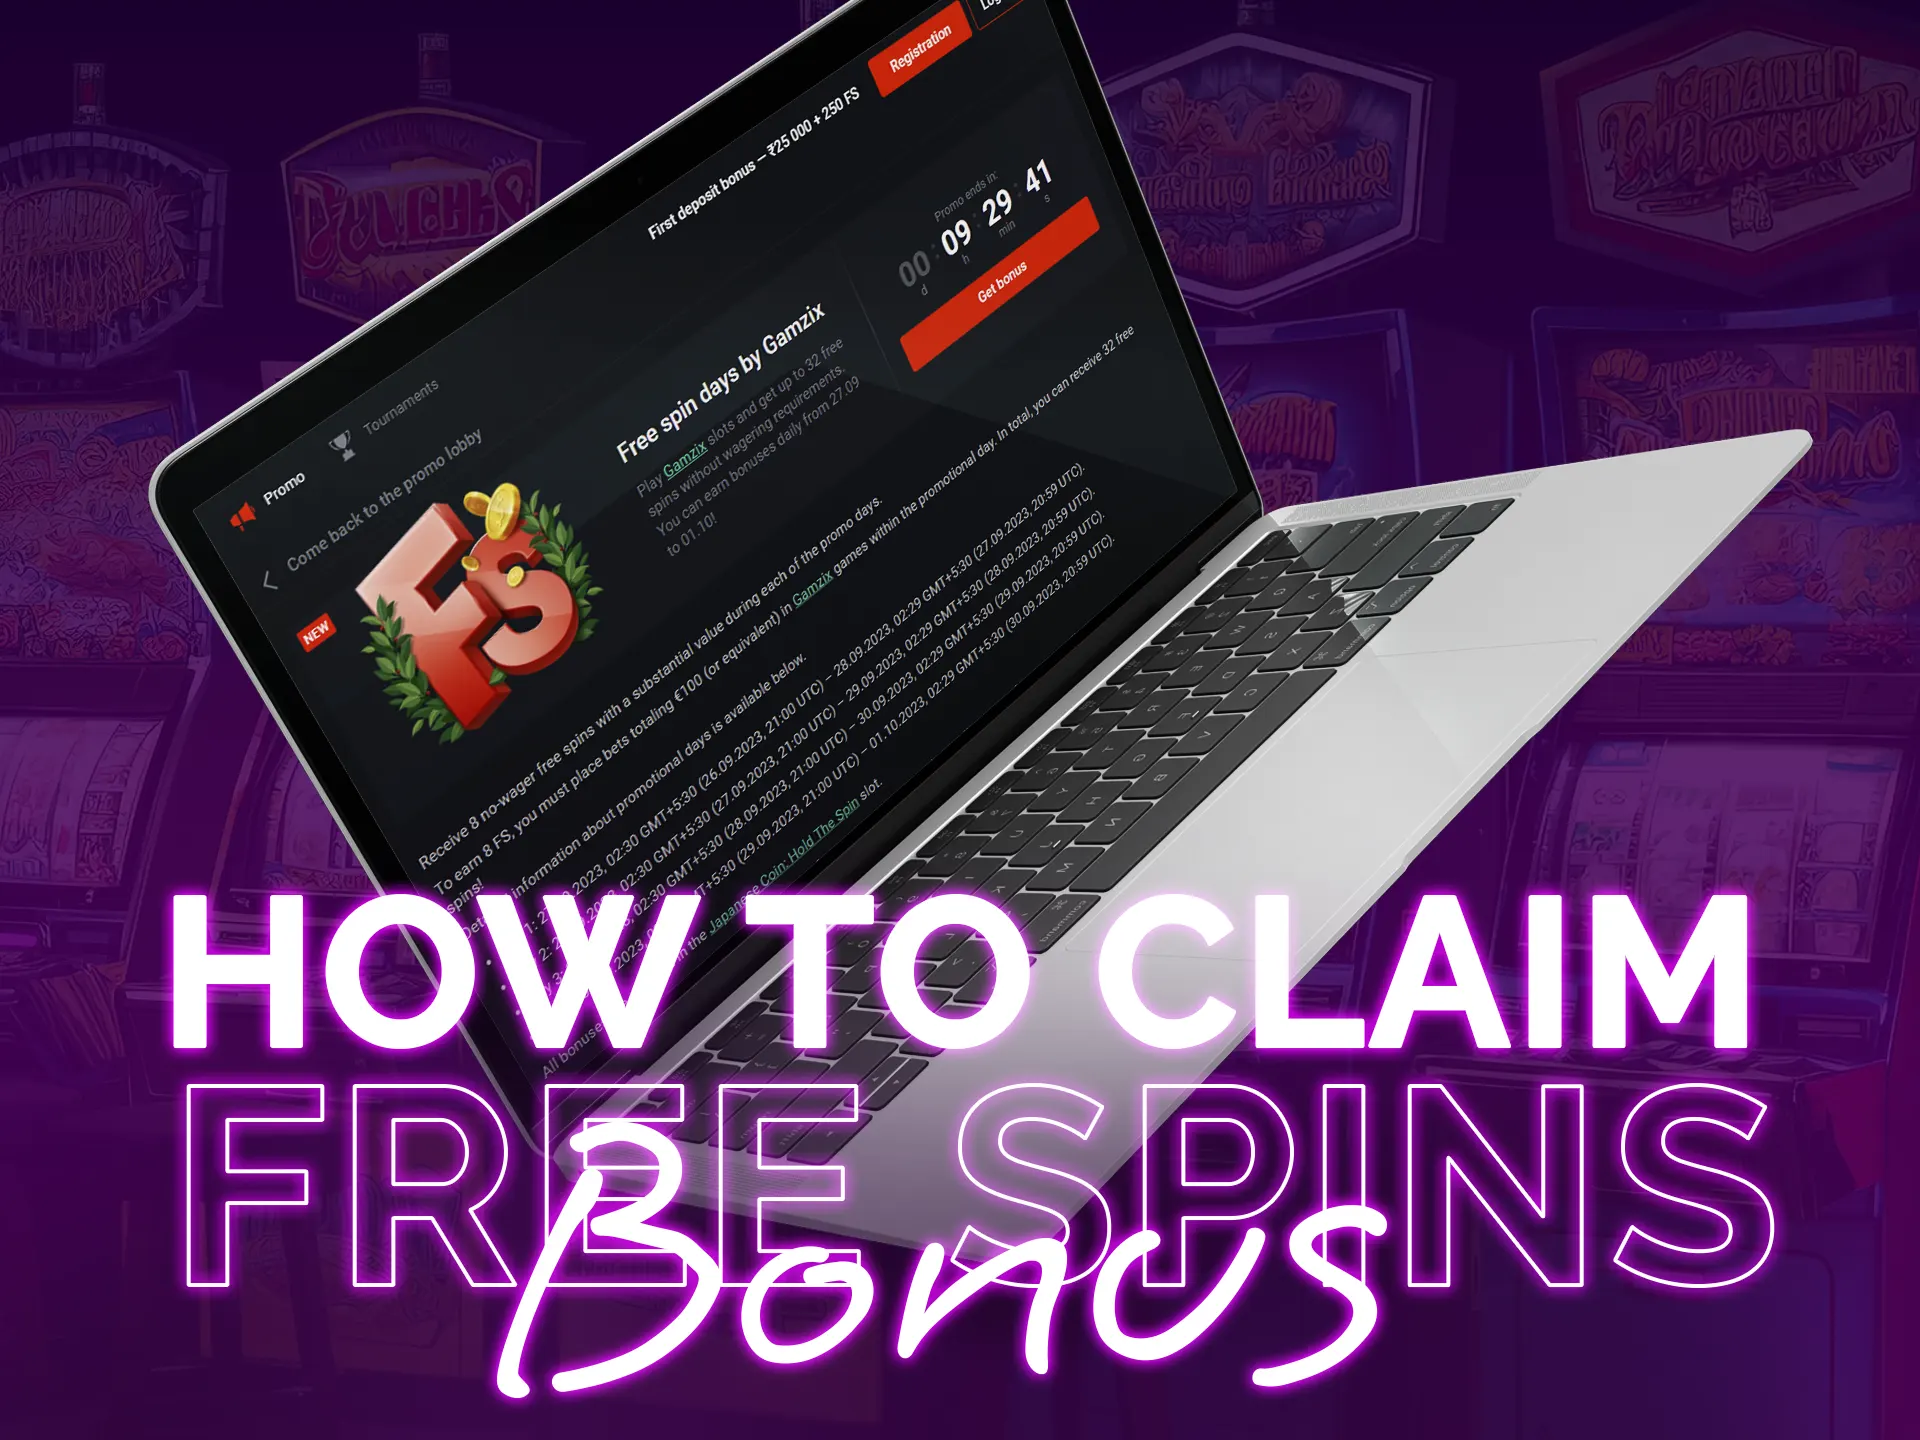 Find out how to claim free spins bonuses.